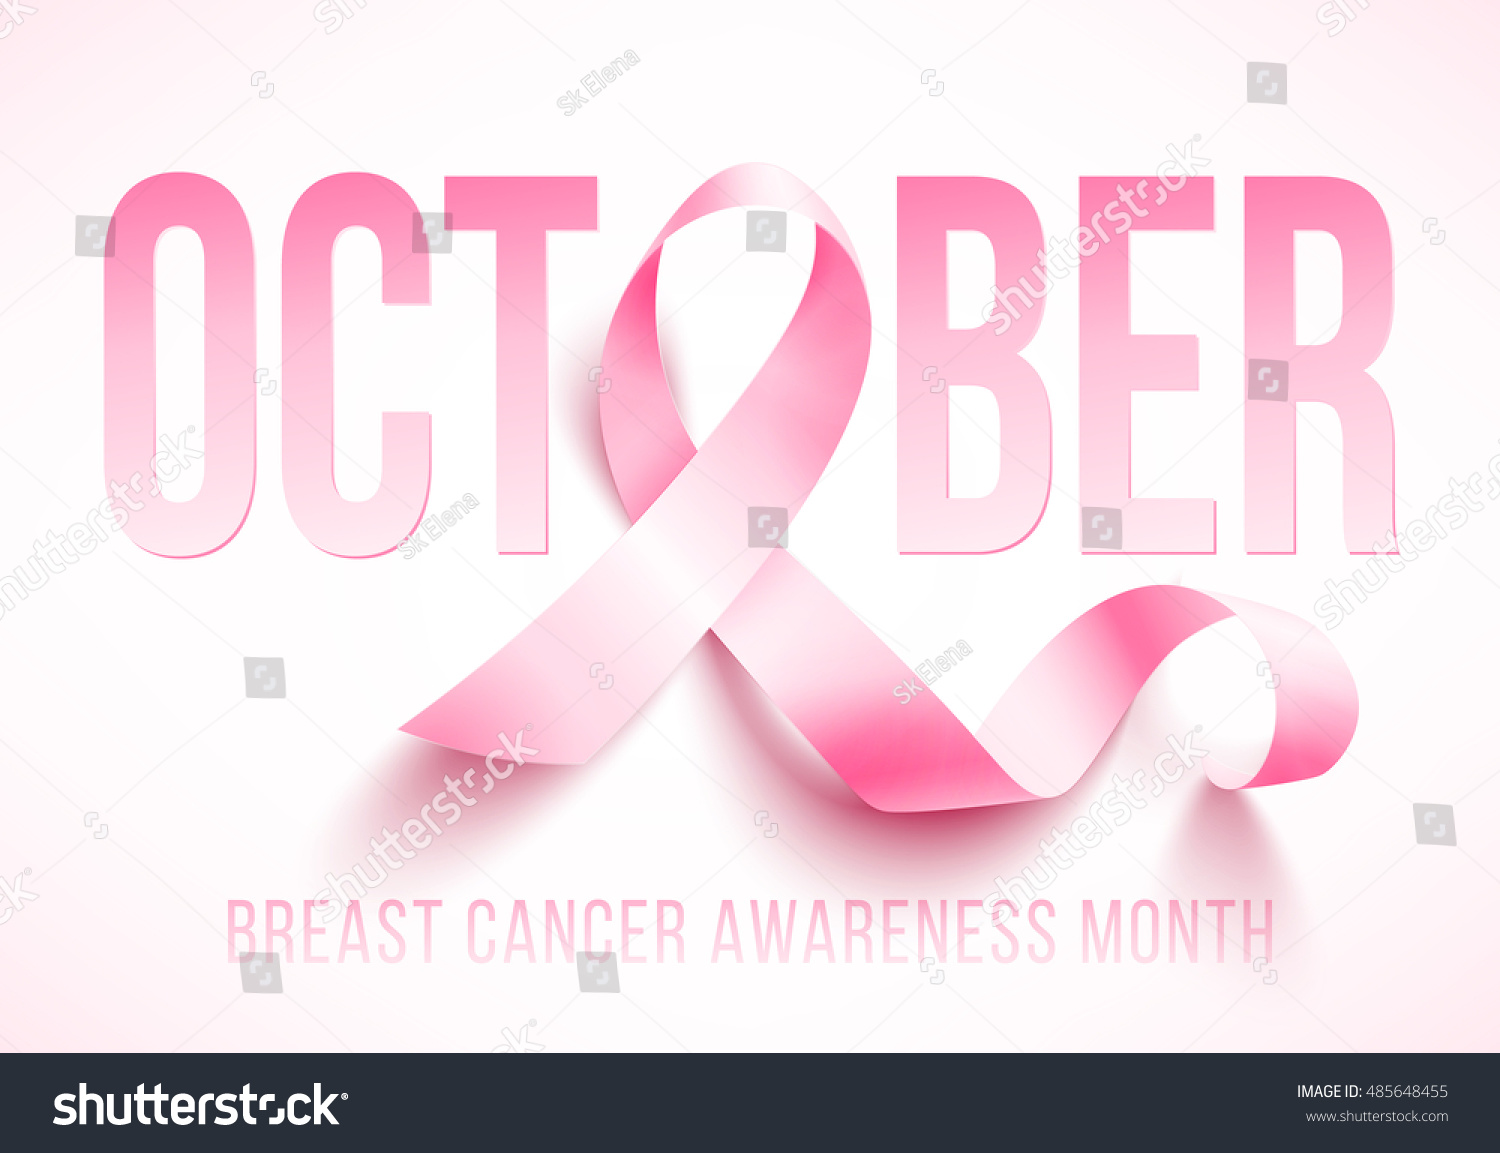 Realistic Pink Ribbon Breast Cancer Awareness Stock Vector 485648455  Shutterstock